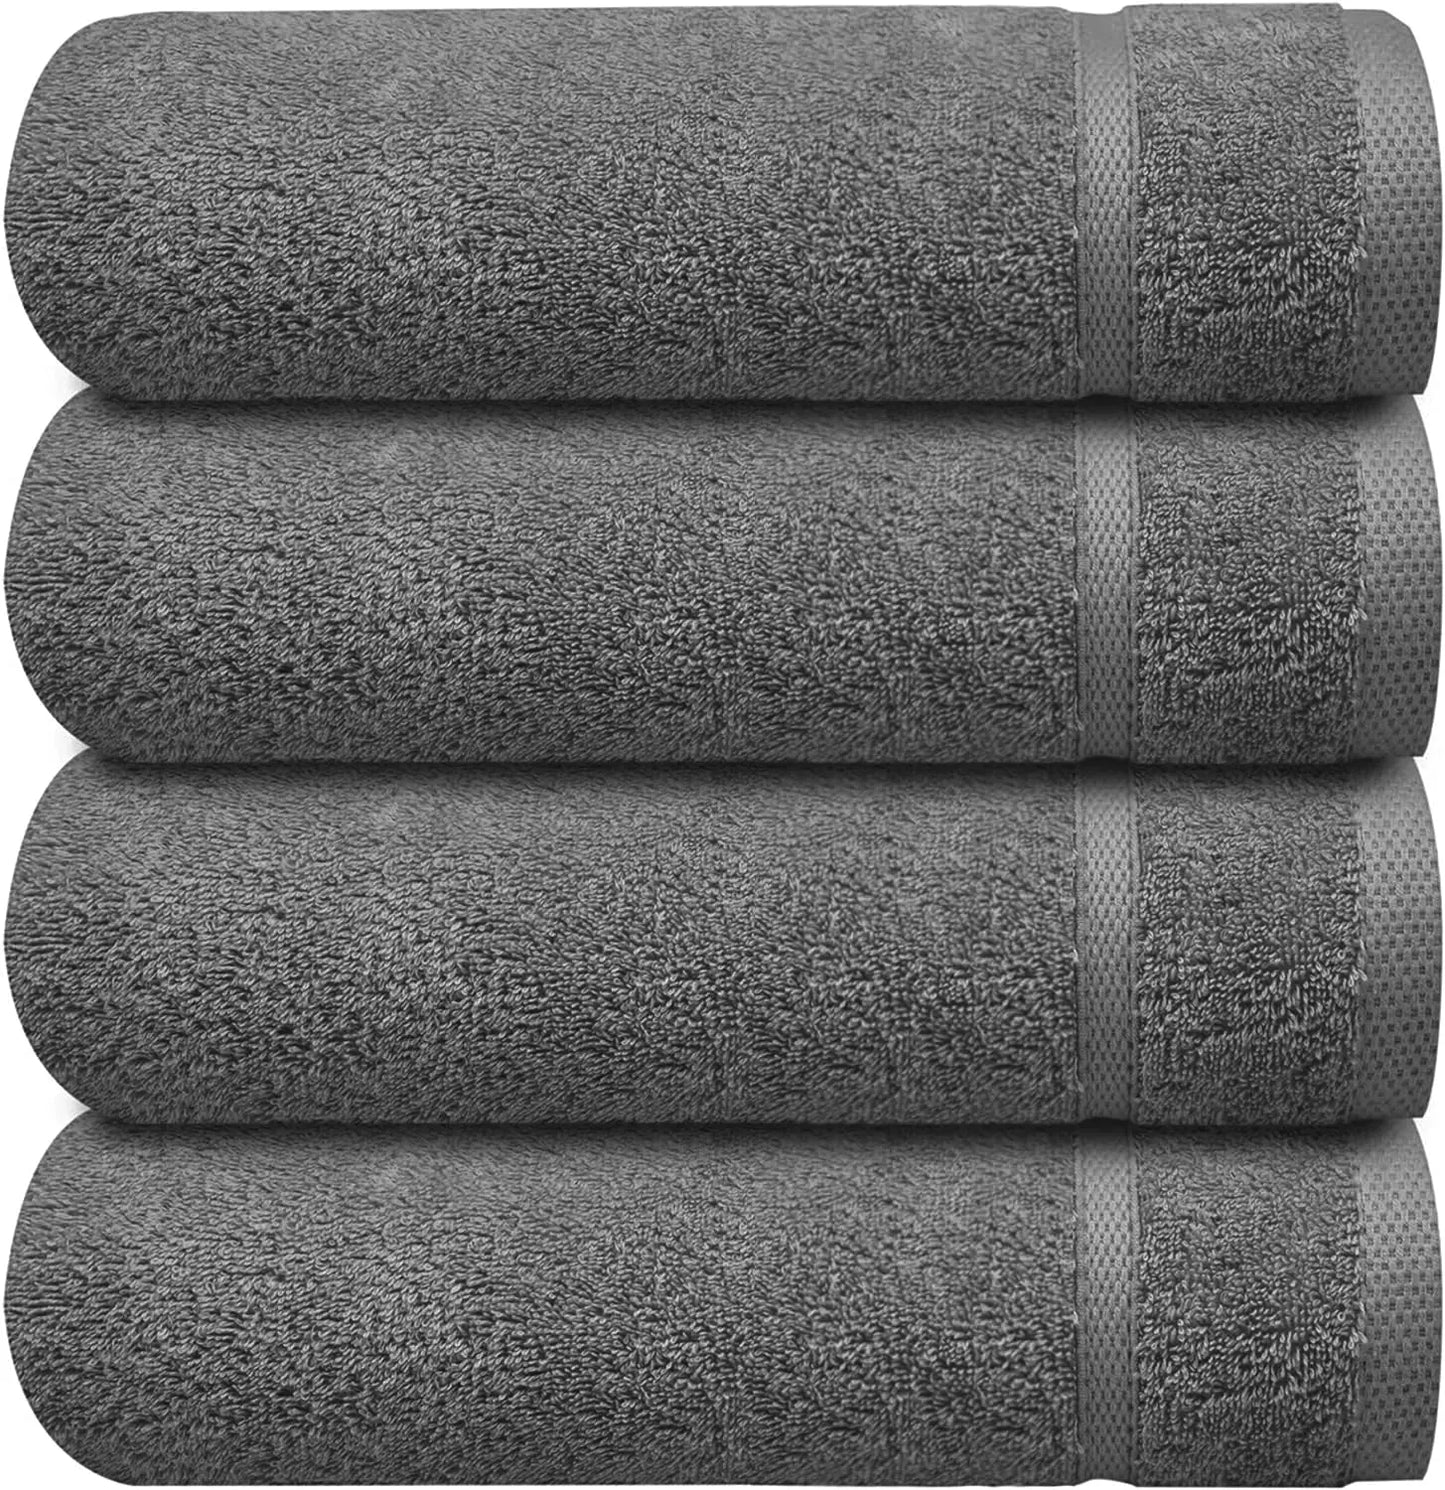 Soft 600GSM Royal Egyptian Collection Bath Towels